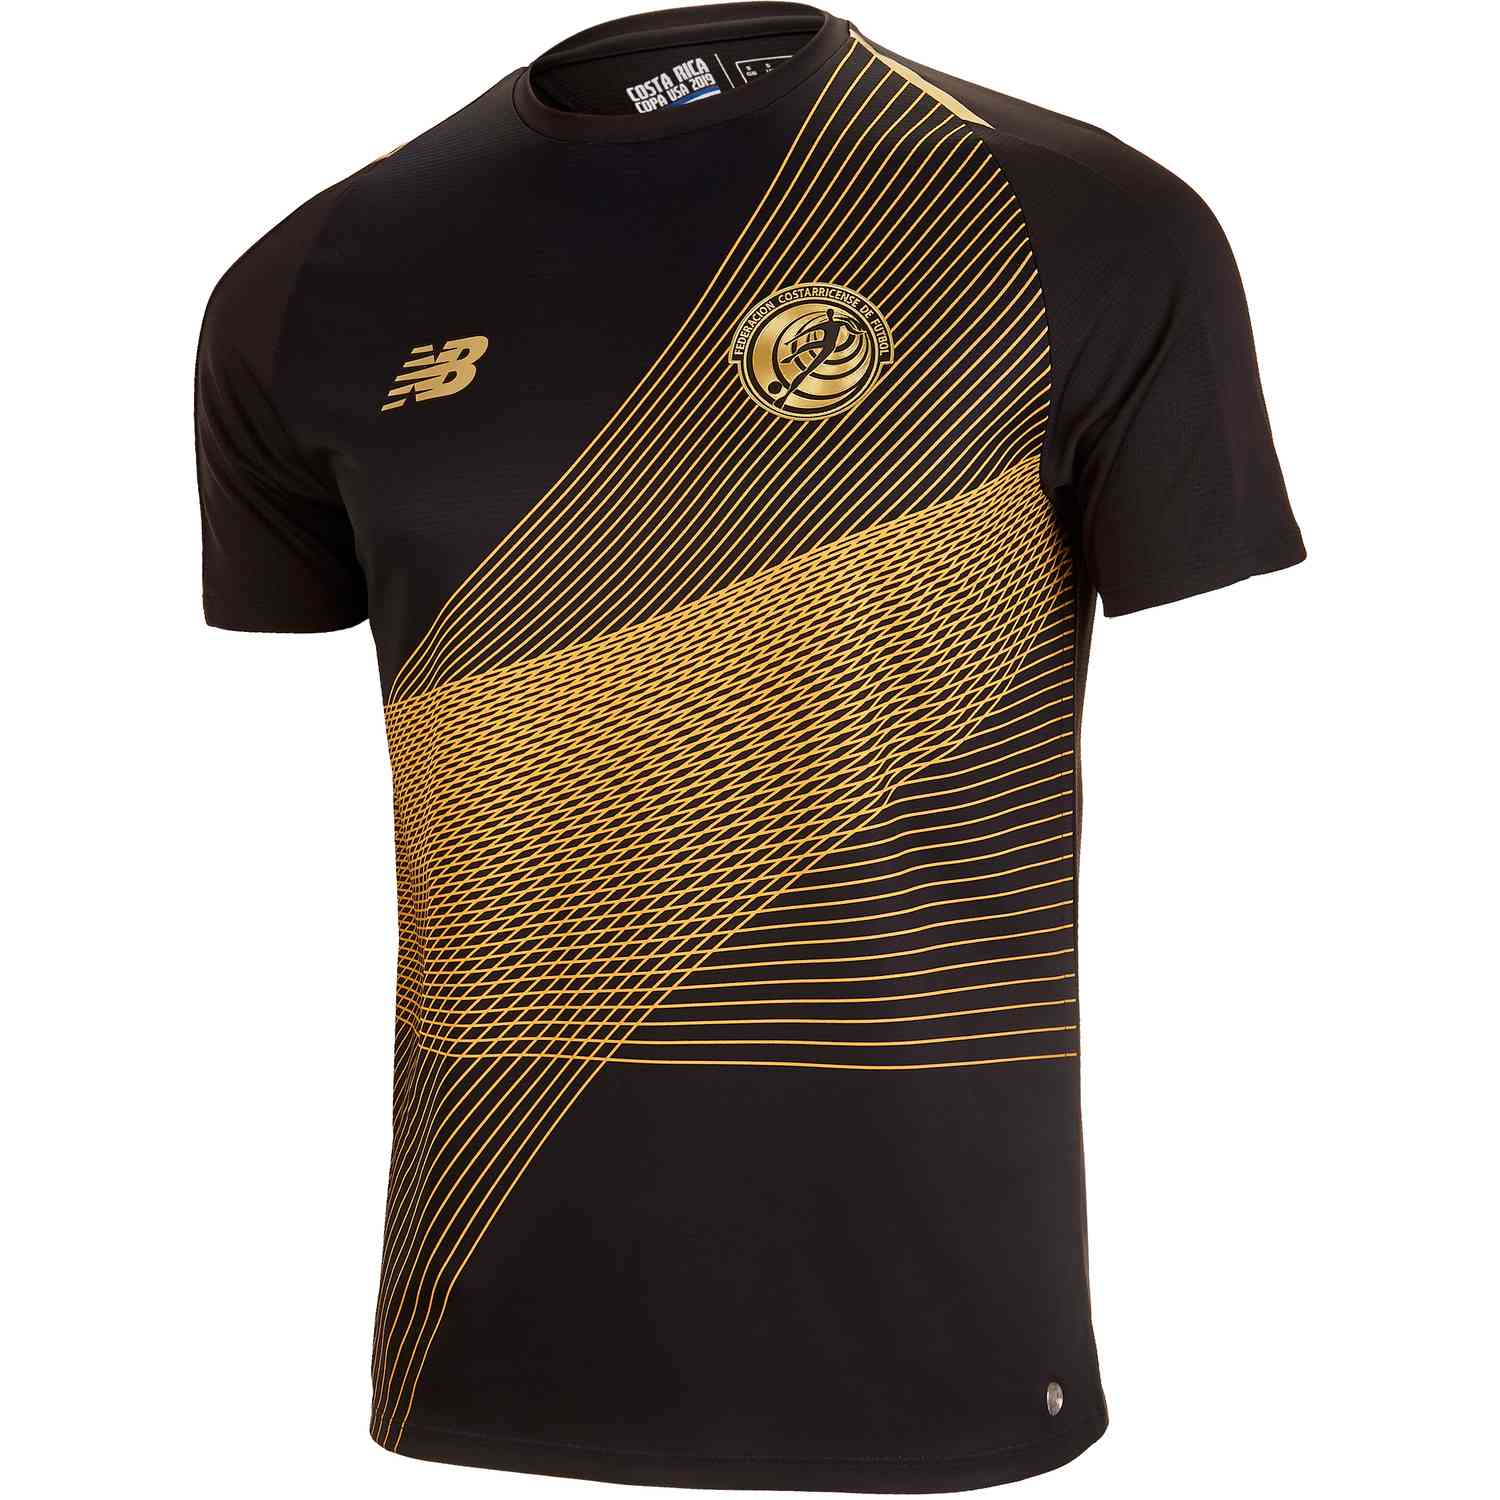 gold cup jerseys